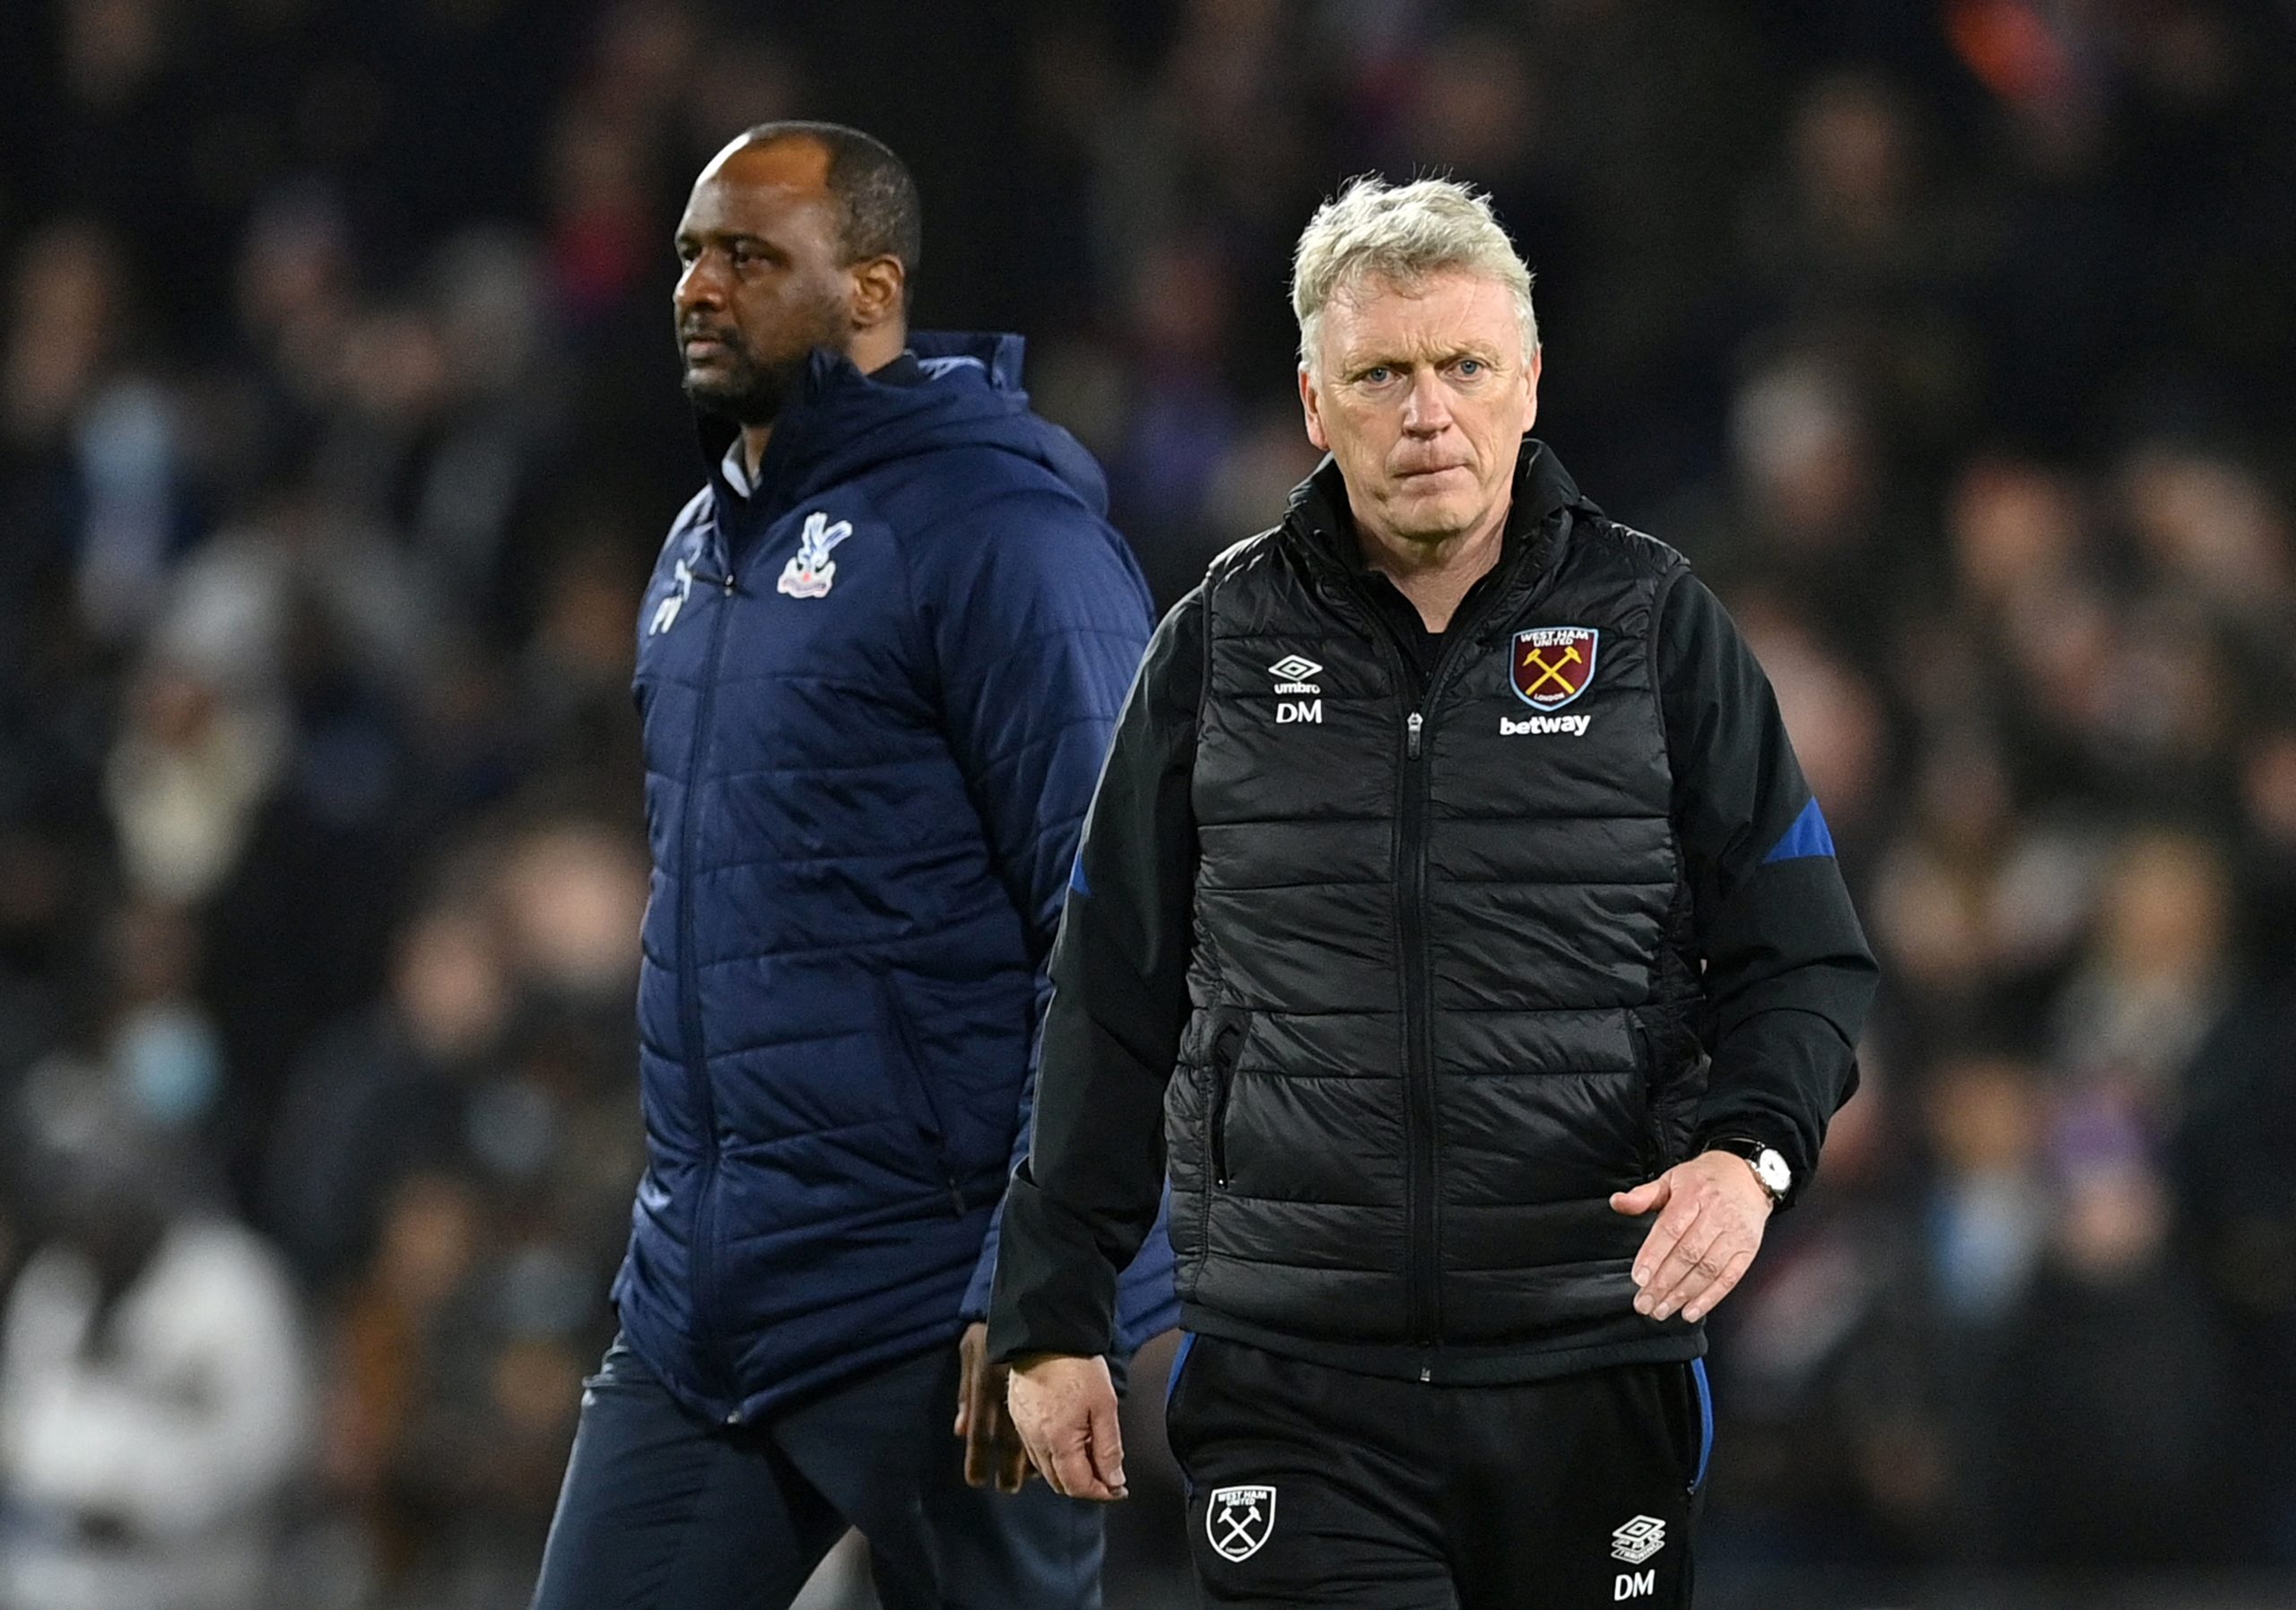 West Ham boss David Moyes has done Patrick Vieira and Swansea like kippers over £12.5m Flynn Downes transfer